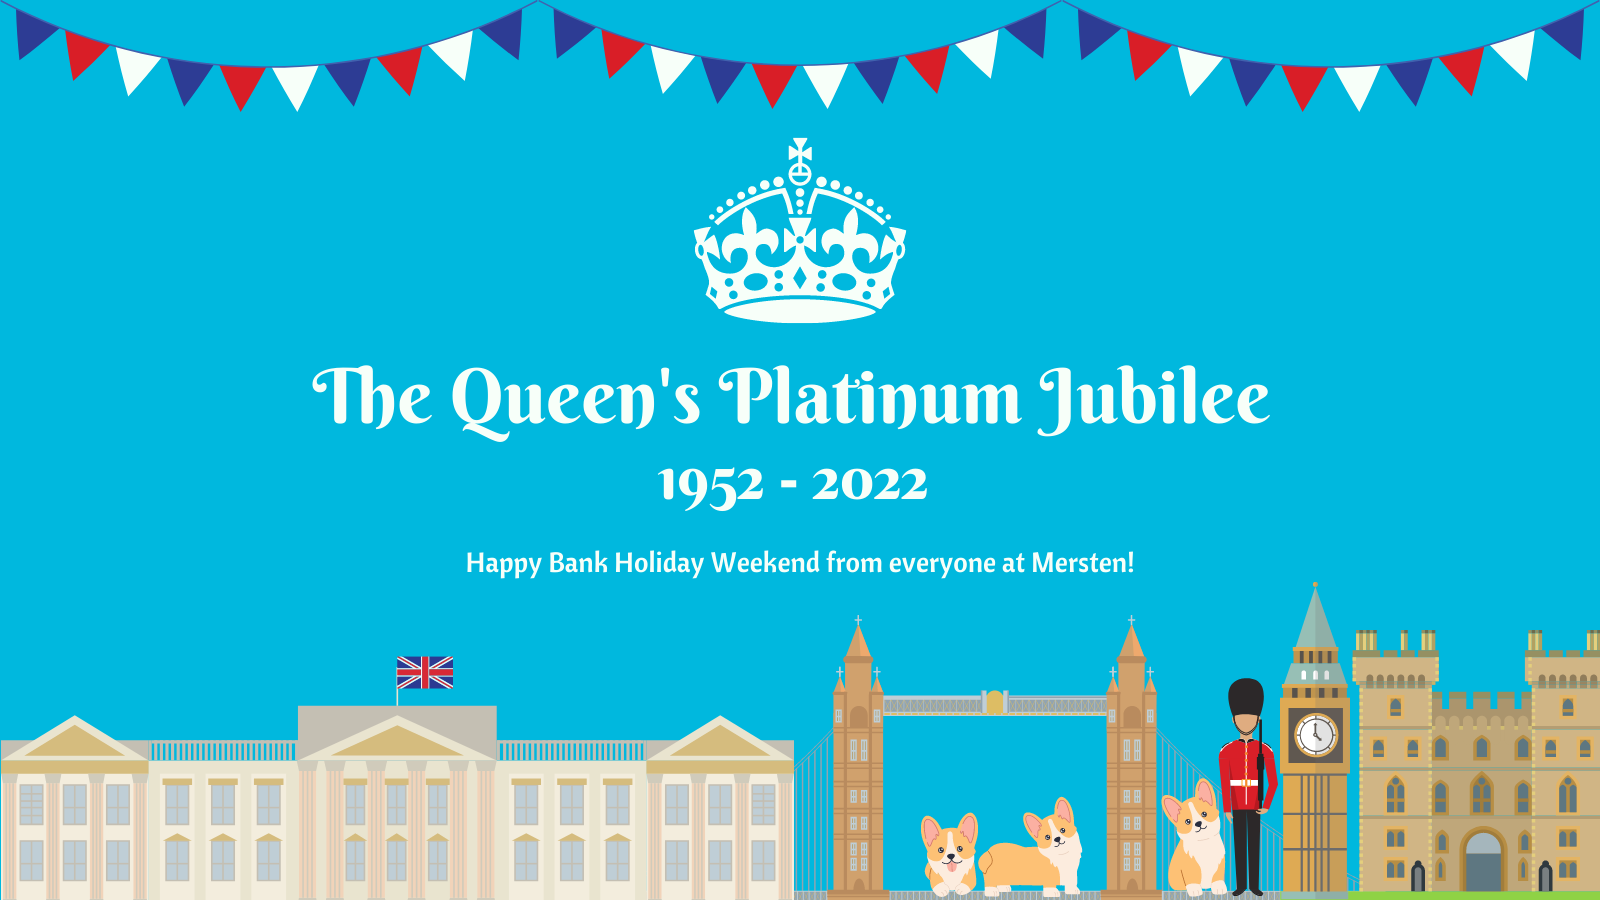 Text that reads 'the queen's platinum jubilee 1952 - 2022, happy bank holiday weekend from everyone at mersten' with images of buckingham palace, tower bridge, corgies, the queens guard, big ben and the tower of london along the bottom and a crown and red, white and blue bunting along the top